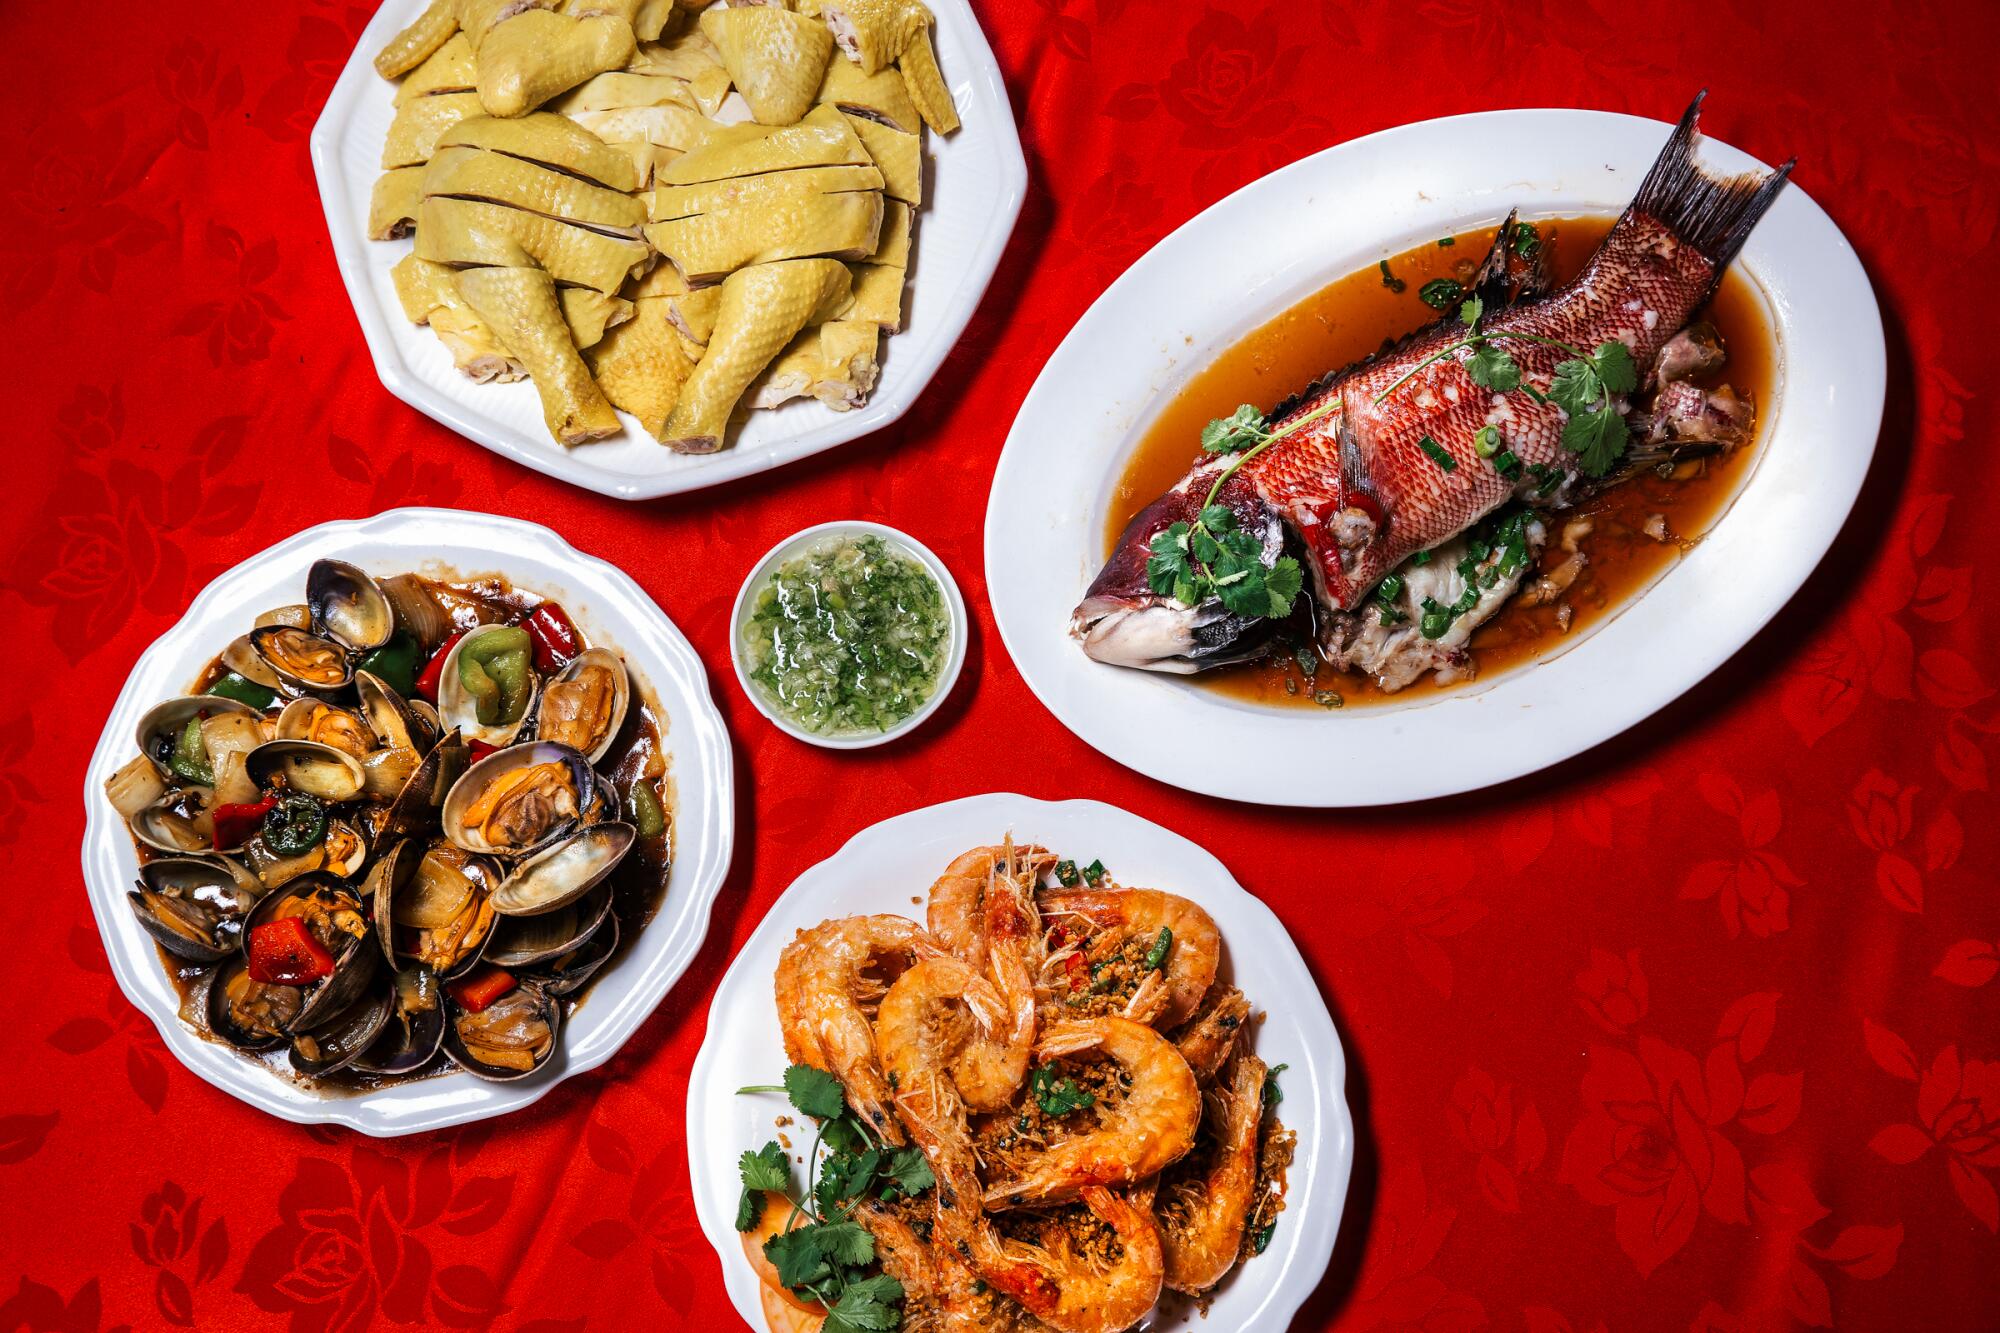 Lunar New Year foods to love: whole fish, spring rolls, noodles and more -  Los Angeles Times